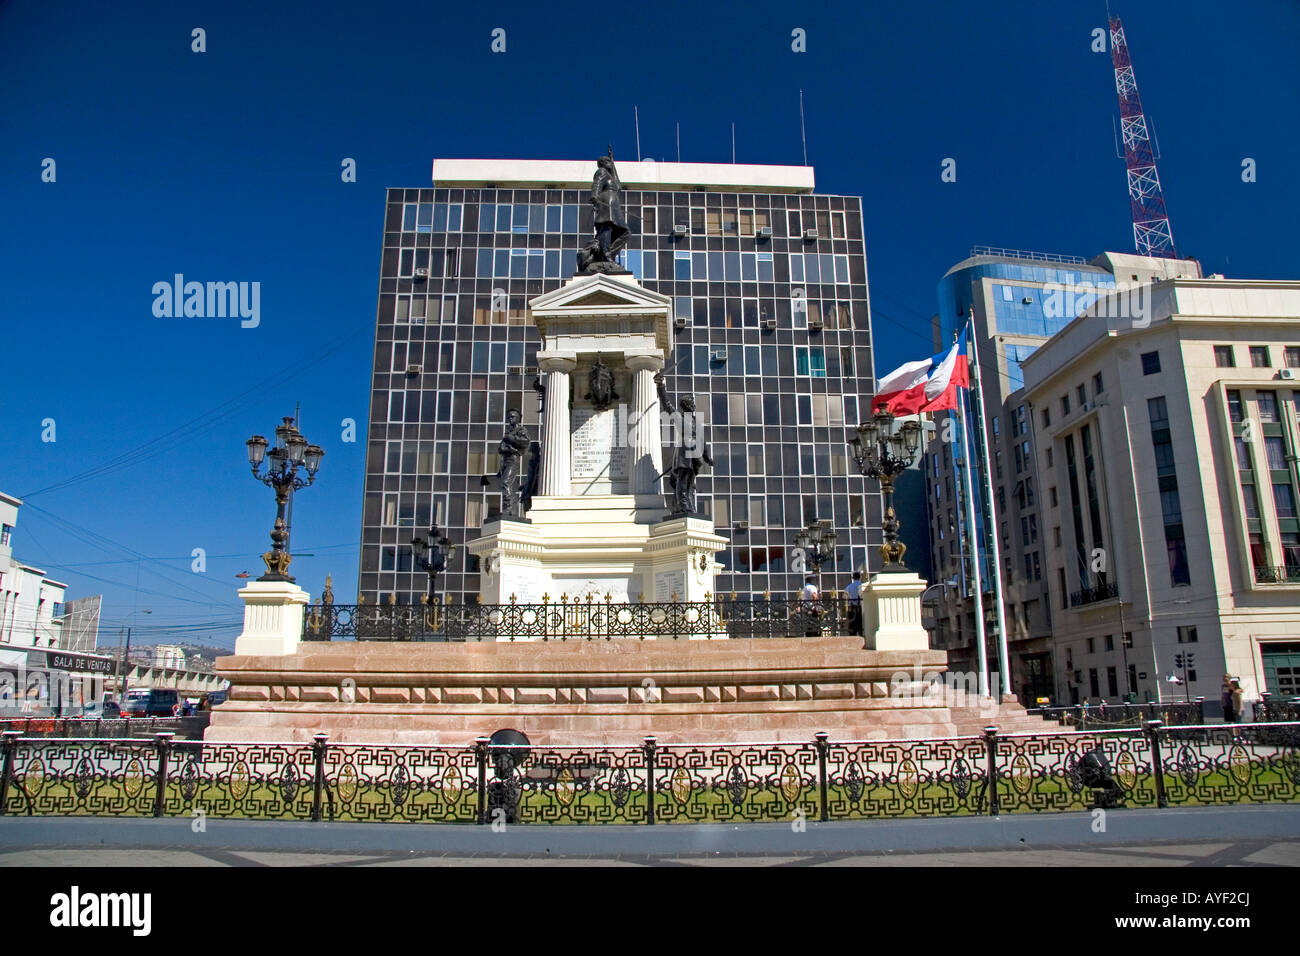 Monument to Naval Heroes of Iquique in Valparaiso Chile Stock Photo